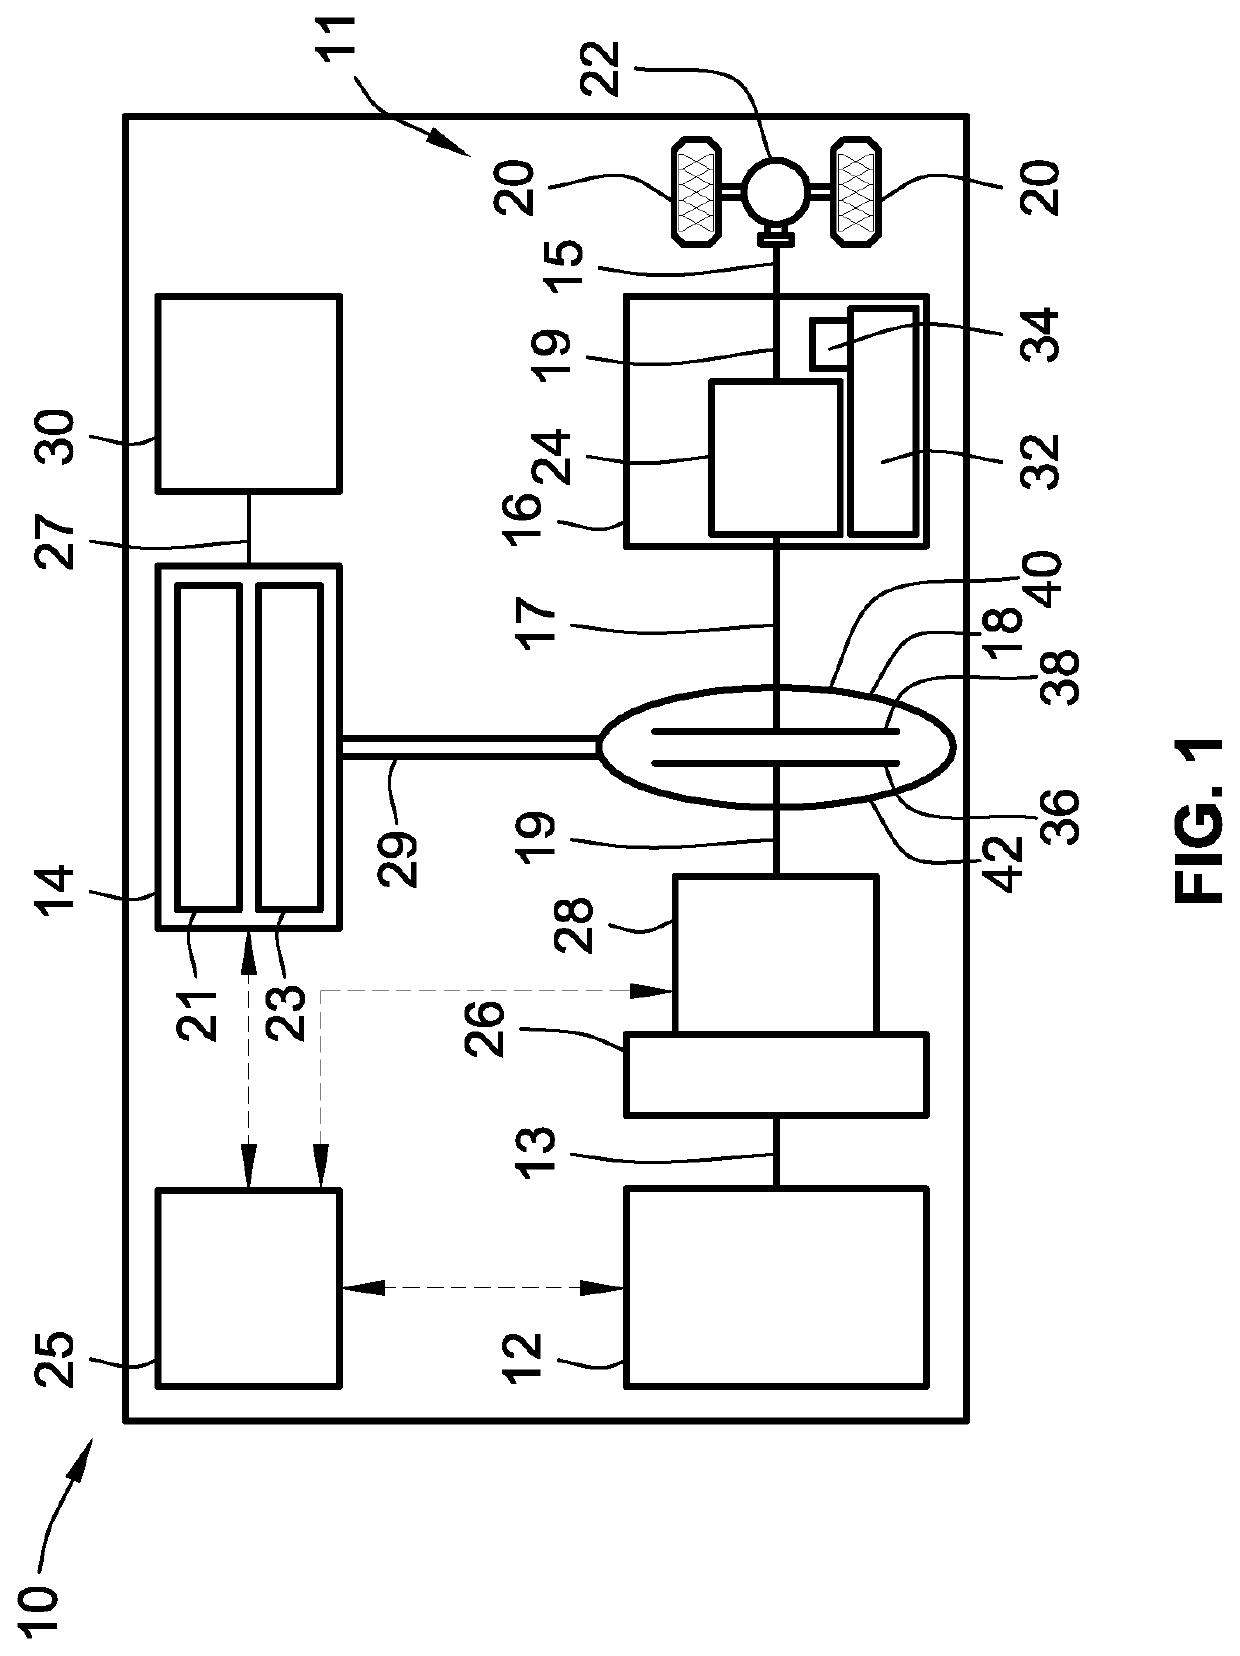 Selectable one-way clutches with notch plate inserts for engine disconnect devices of motor vehicle powertrains